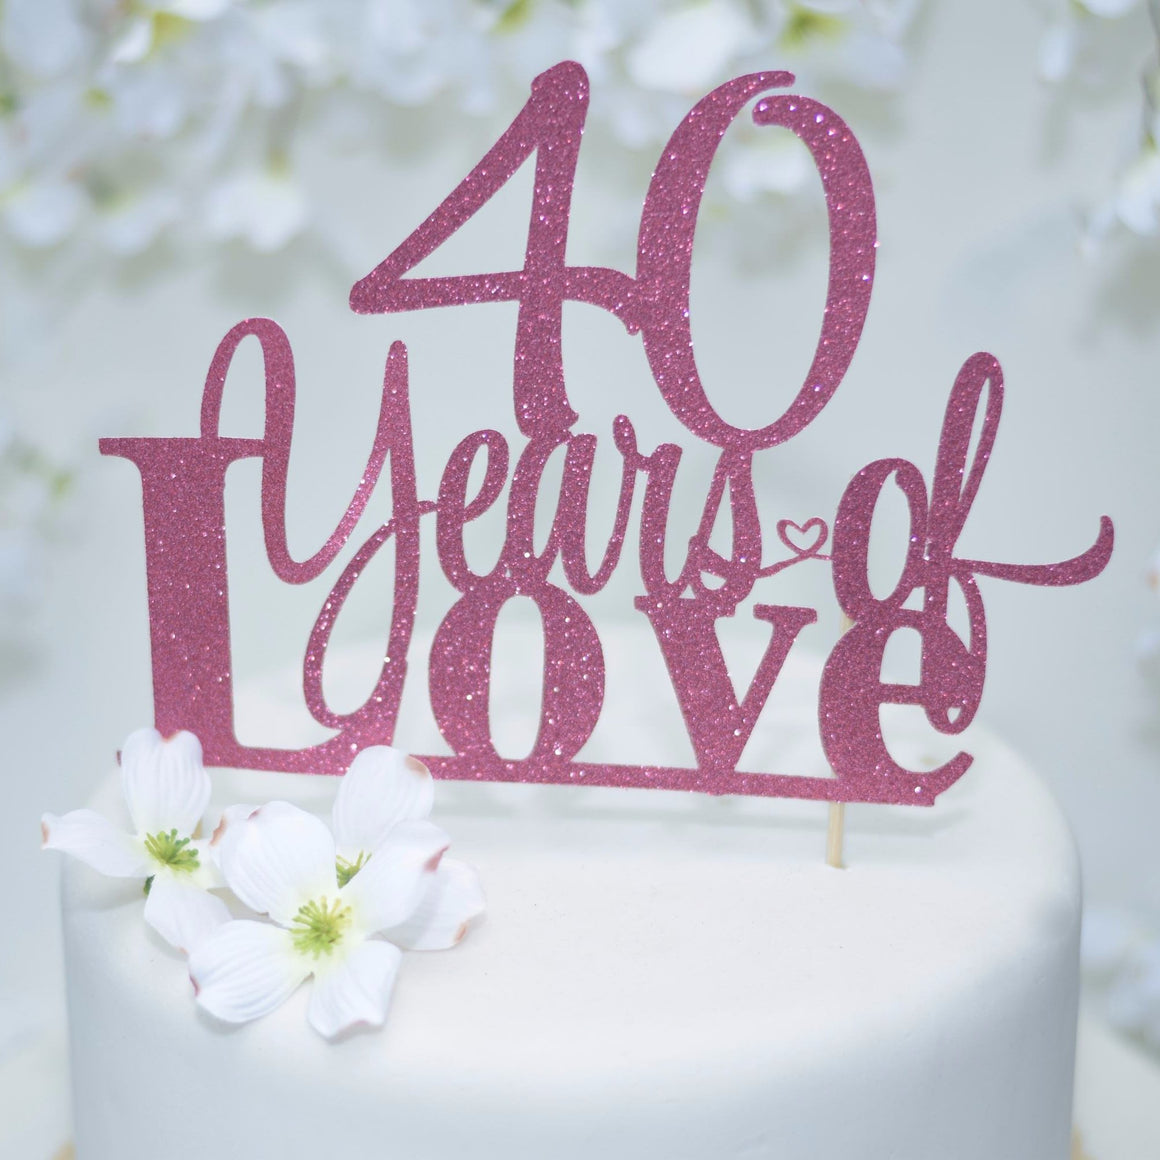 40 Years of Love gold sparkle cake topper with underline below Love on white cake 